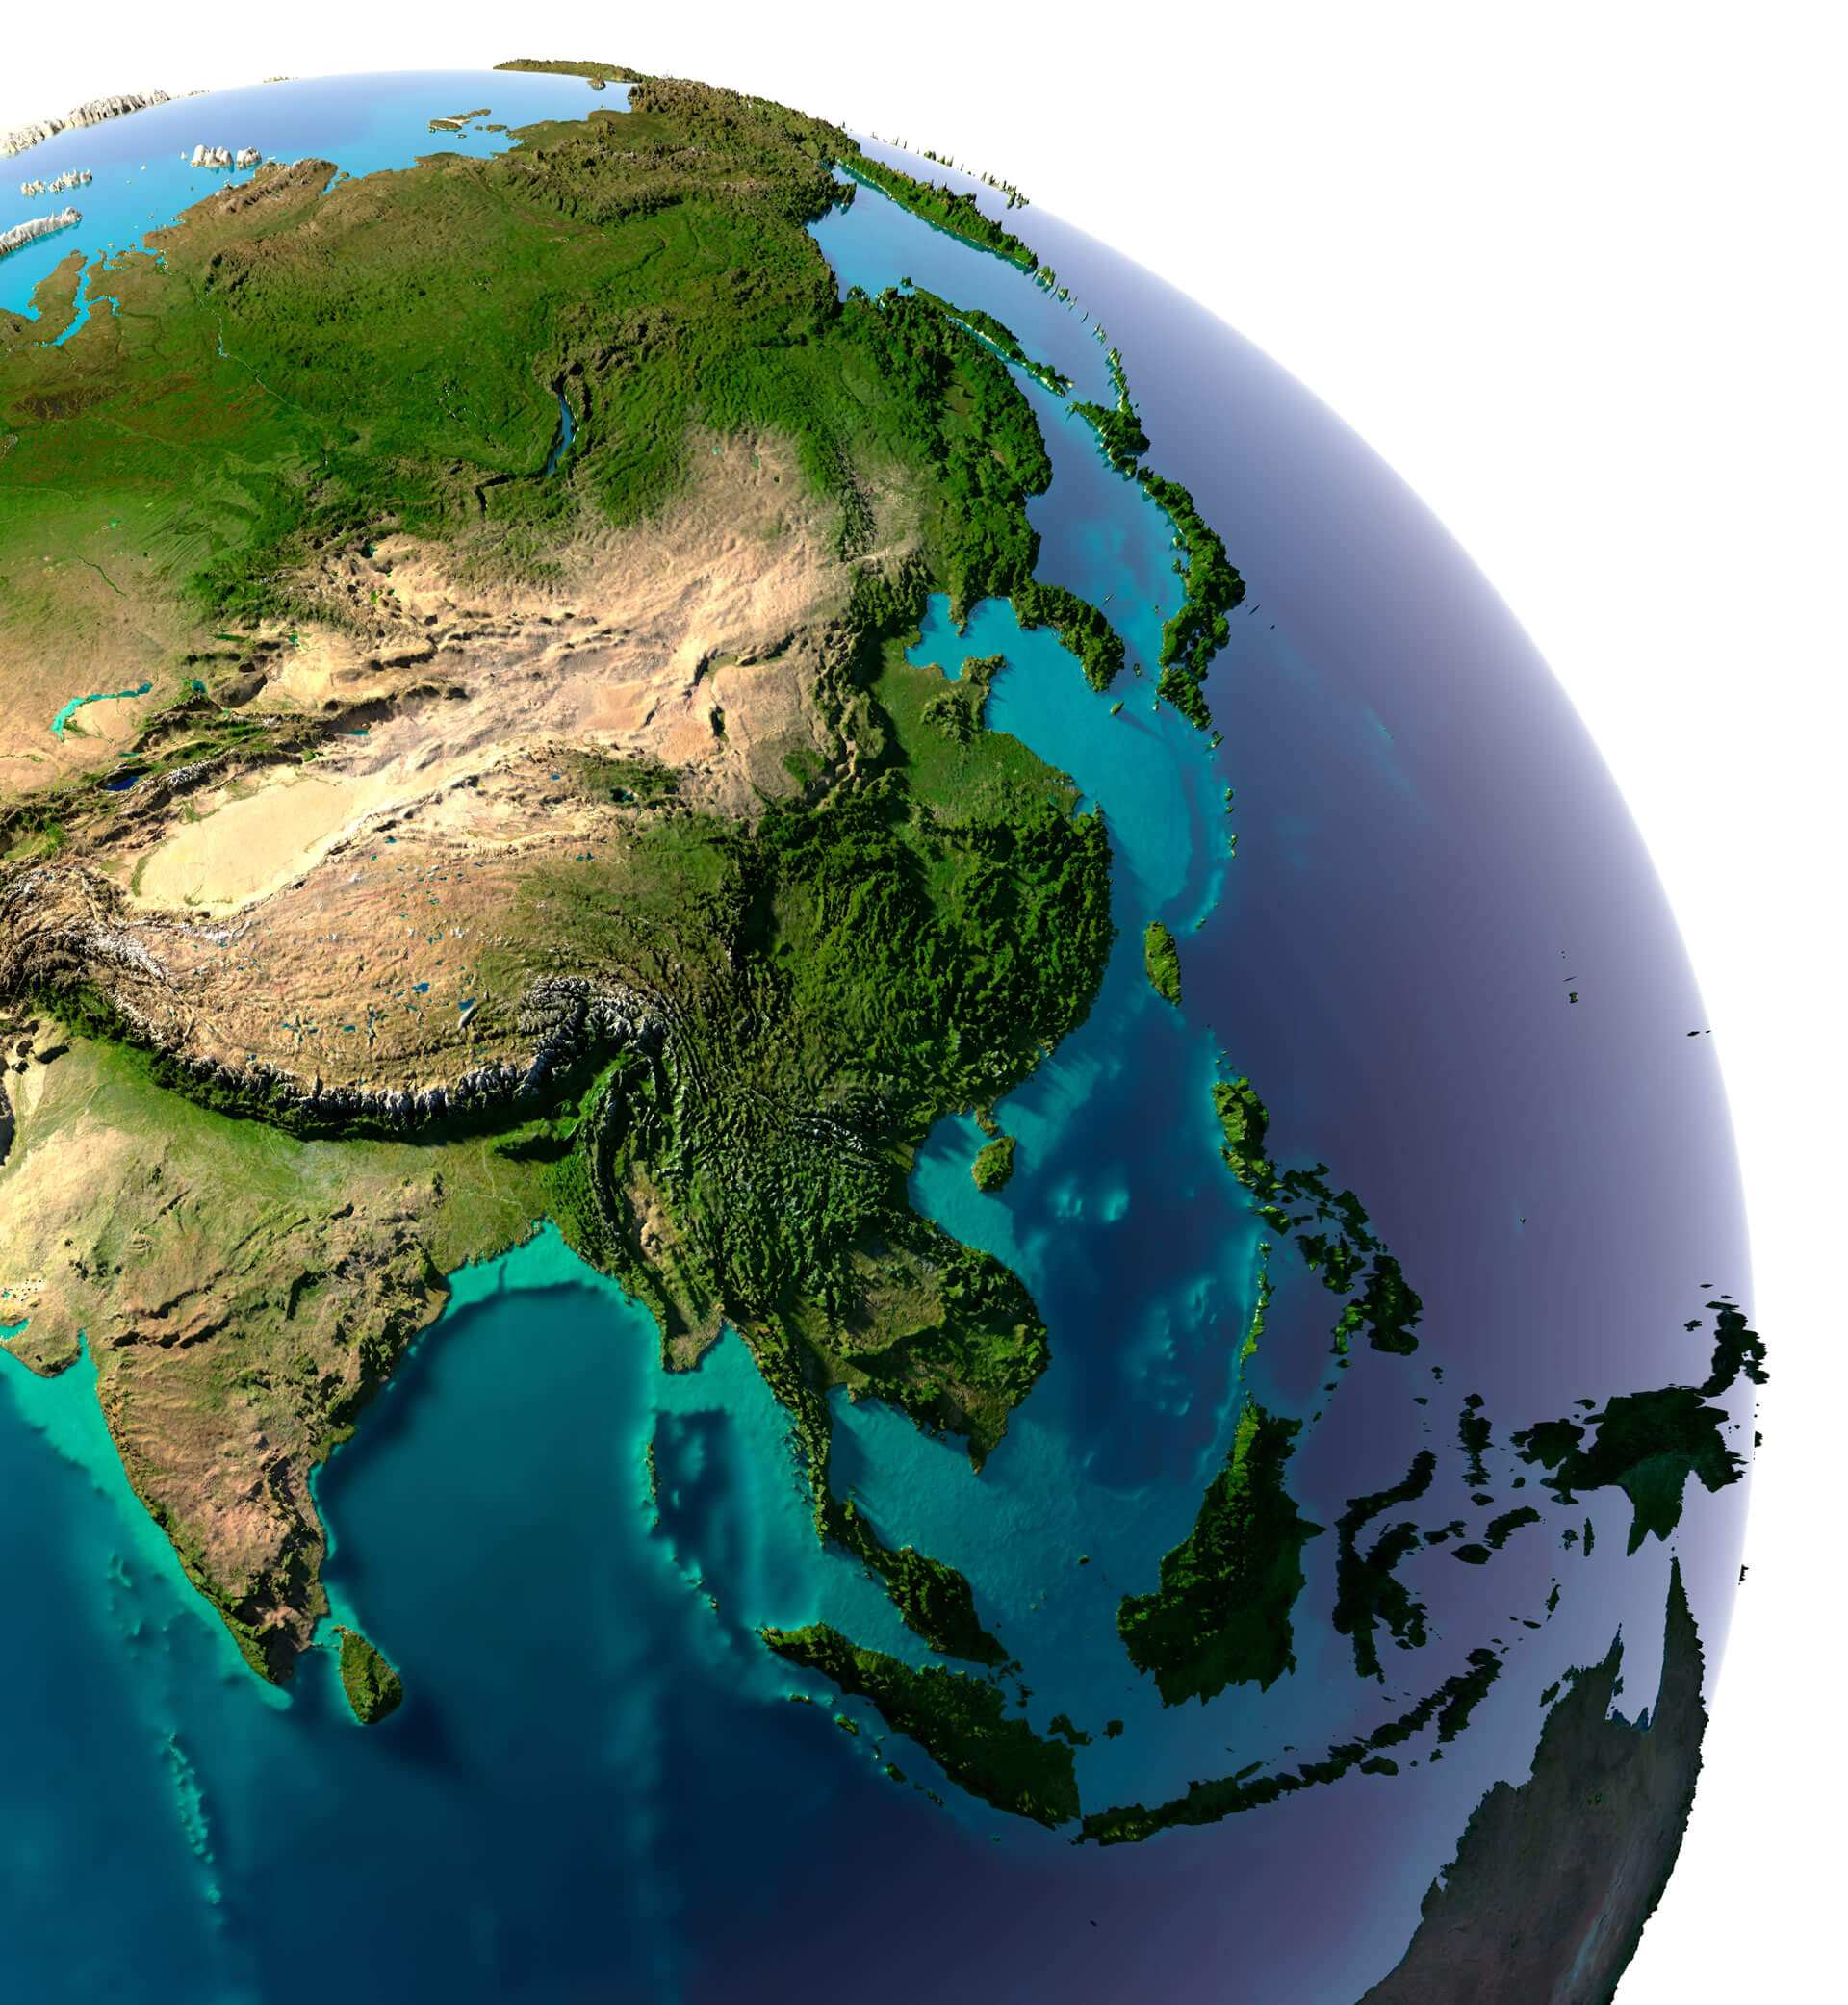 Detailed Topography Map of Asia